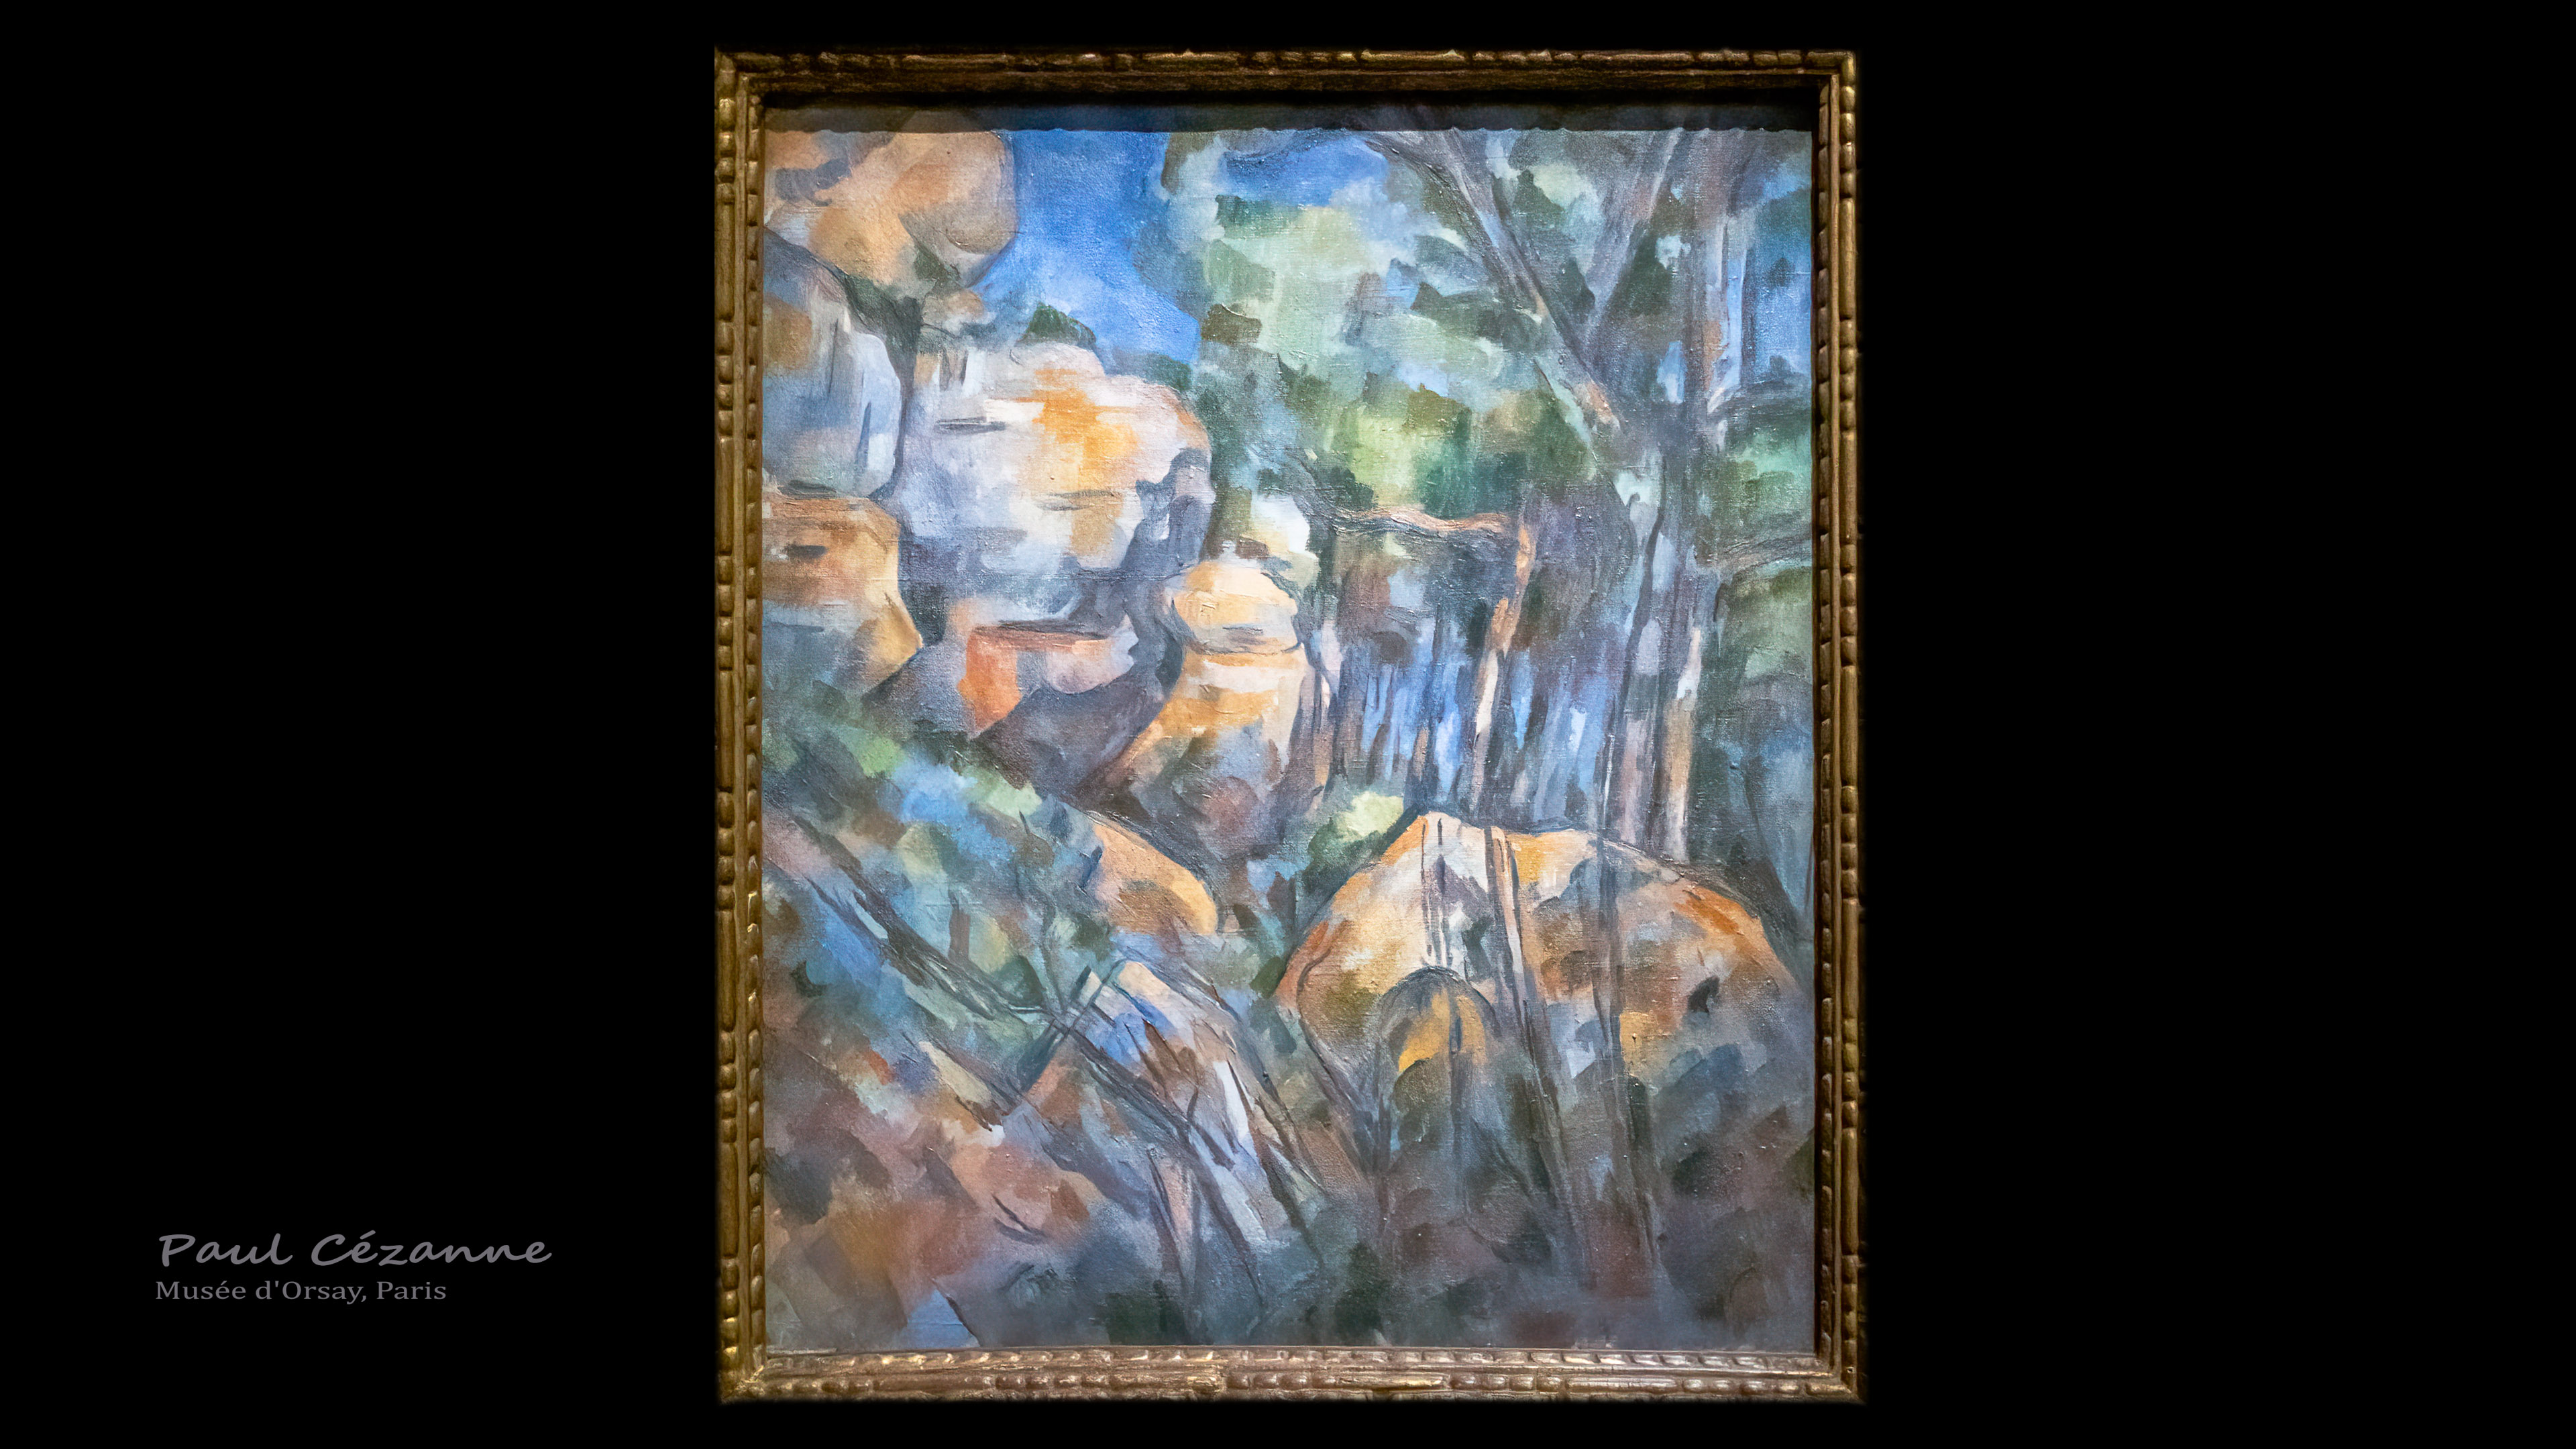 Immerse yourself in the post-impressionist brilliance of Paul Cezanne wallpaper, transforming your digital space into a gallery of timeless art.